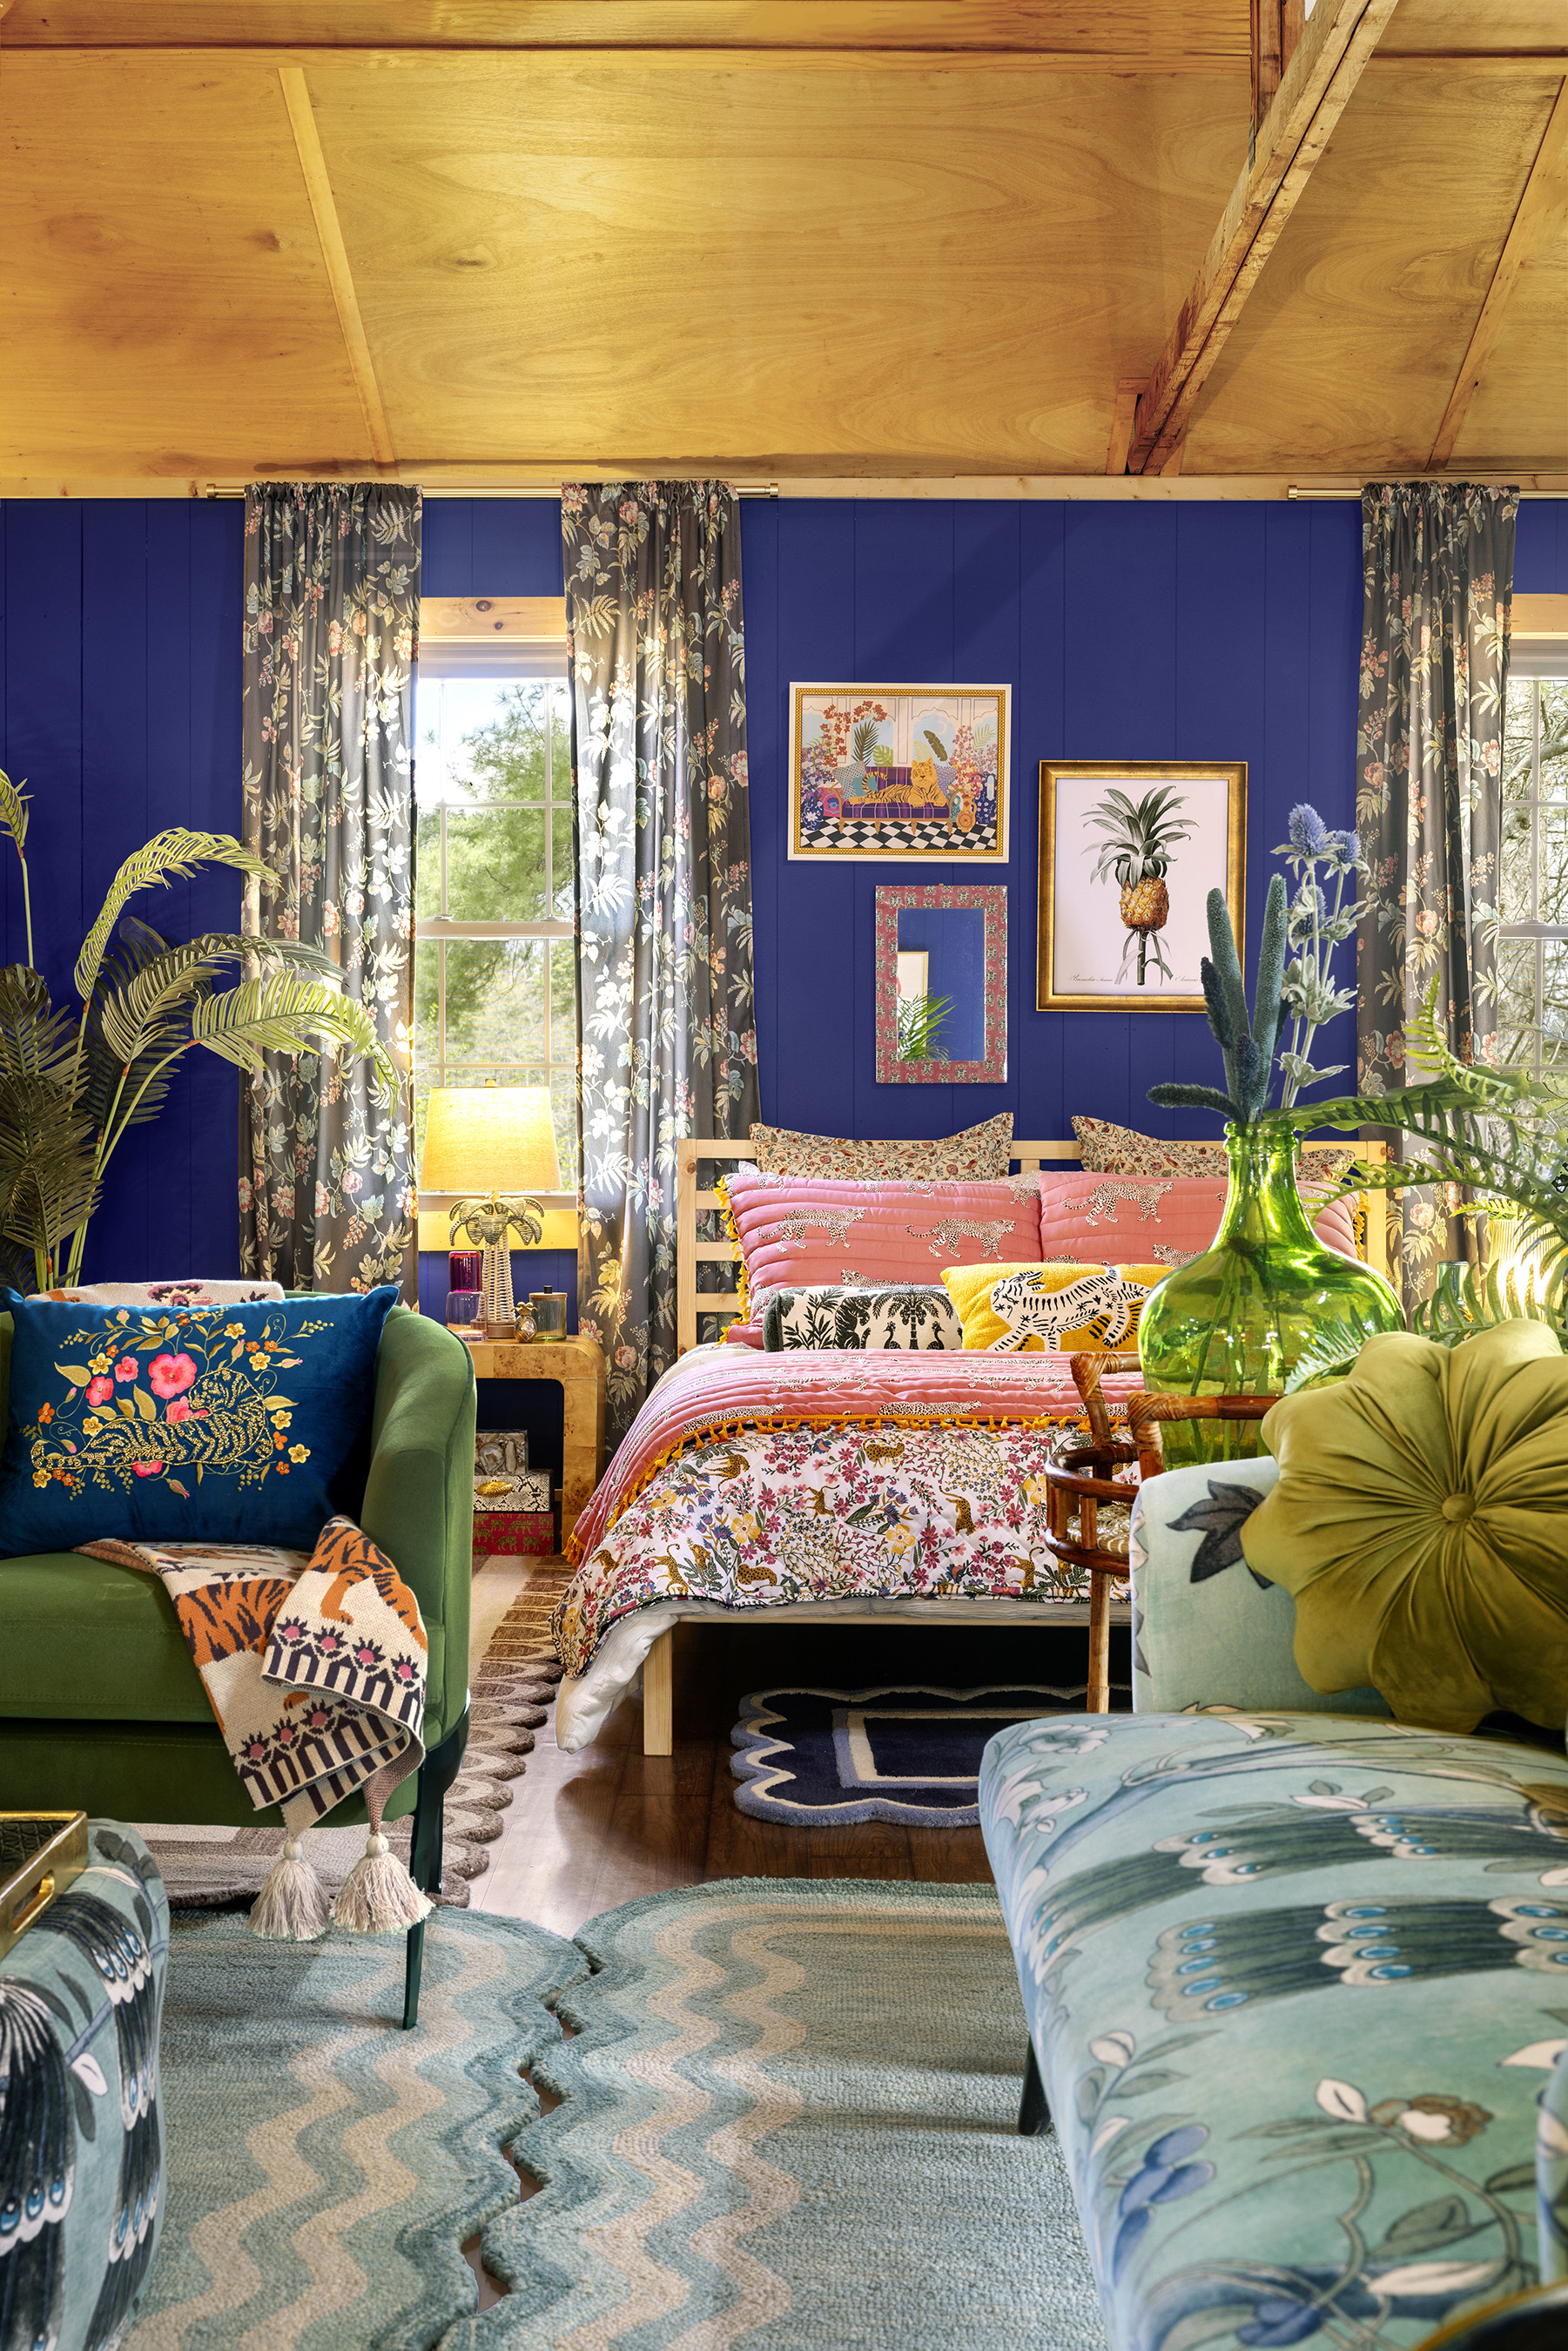 Passionate HomeGoods brand fans can now revel in the thrilling feeling shoppers experience in stores at a reimagined summer camp in the Catskills of New York from June 7-9.